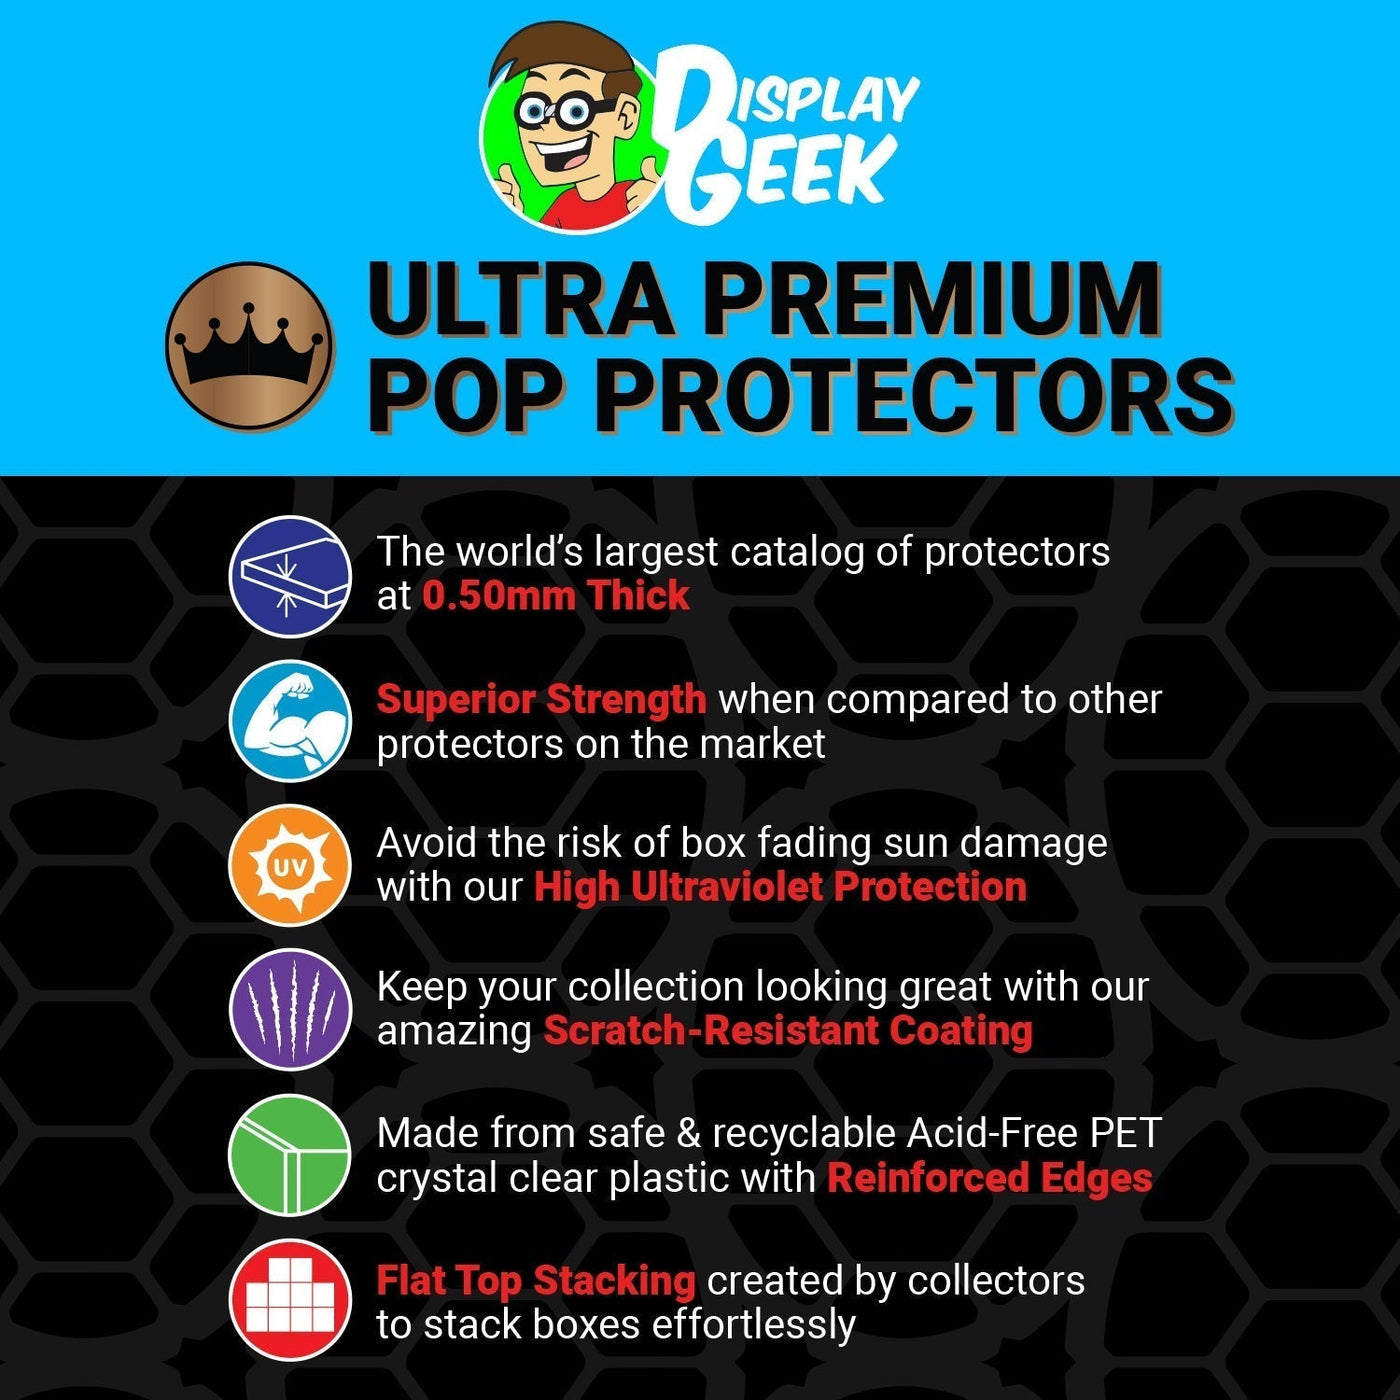 Pop Protector for Jack Skellington FunkO's Cereal Box on The Protector Guide App by Display Geek